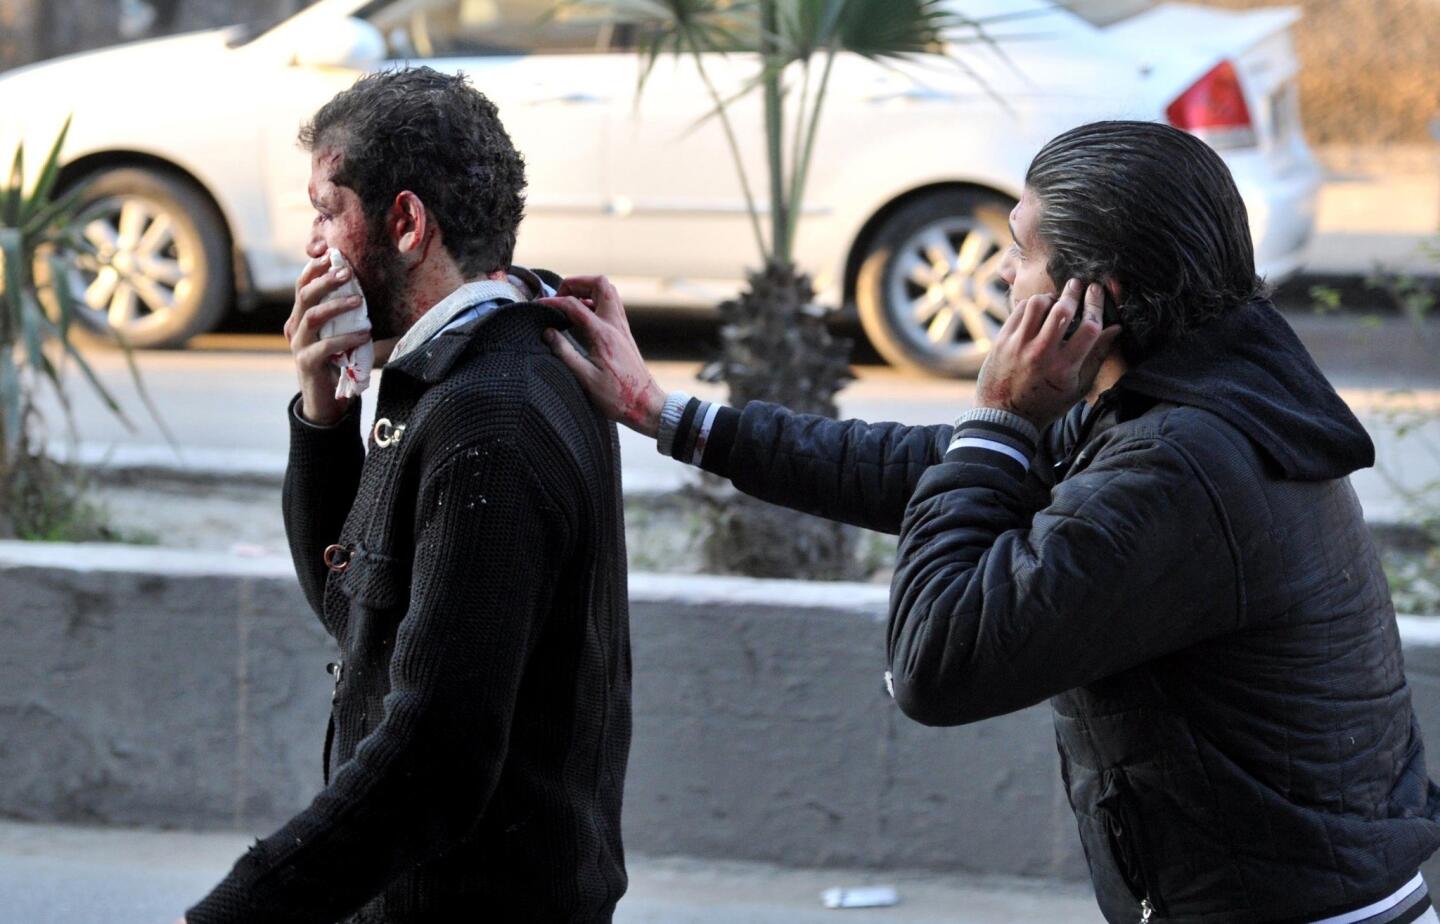 Two injured Syrian men near the scene of a car bomb explosion in Jaramana, a mainly Christian and Druze suburb of Damascus.